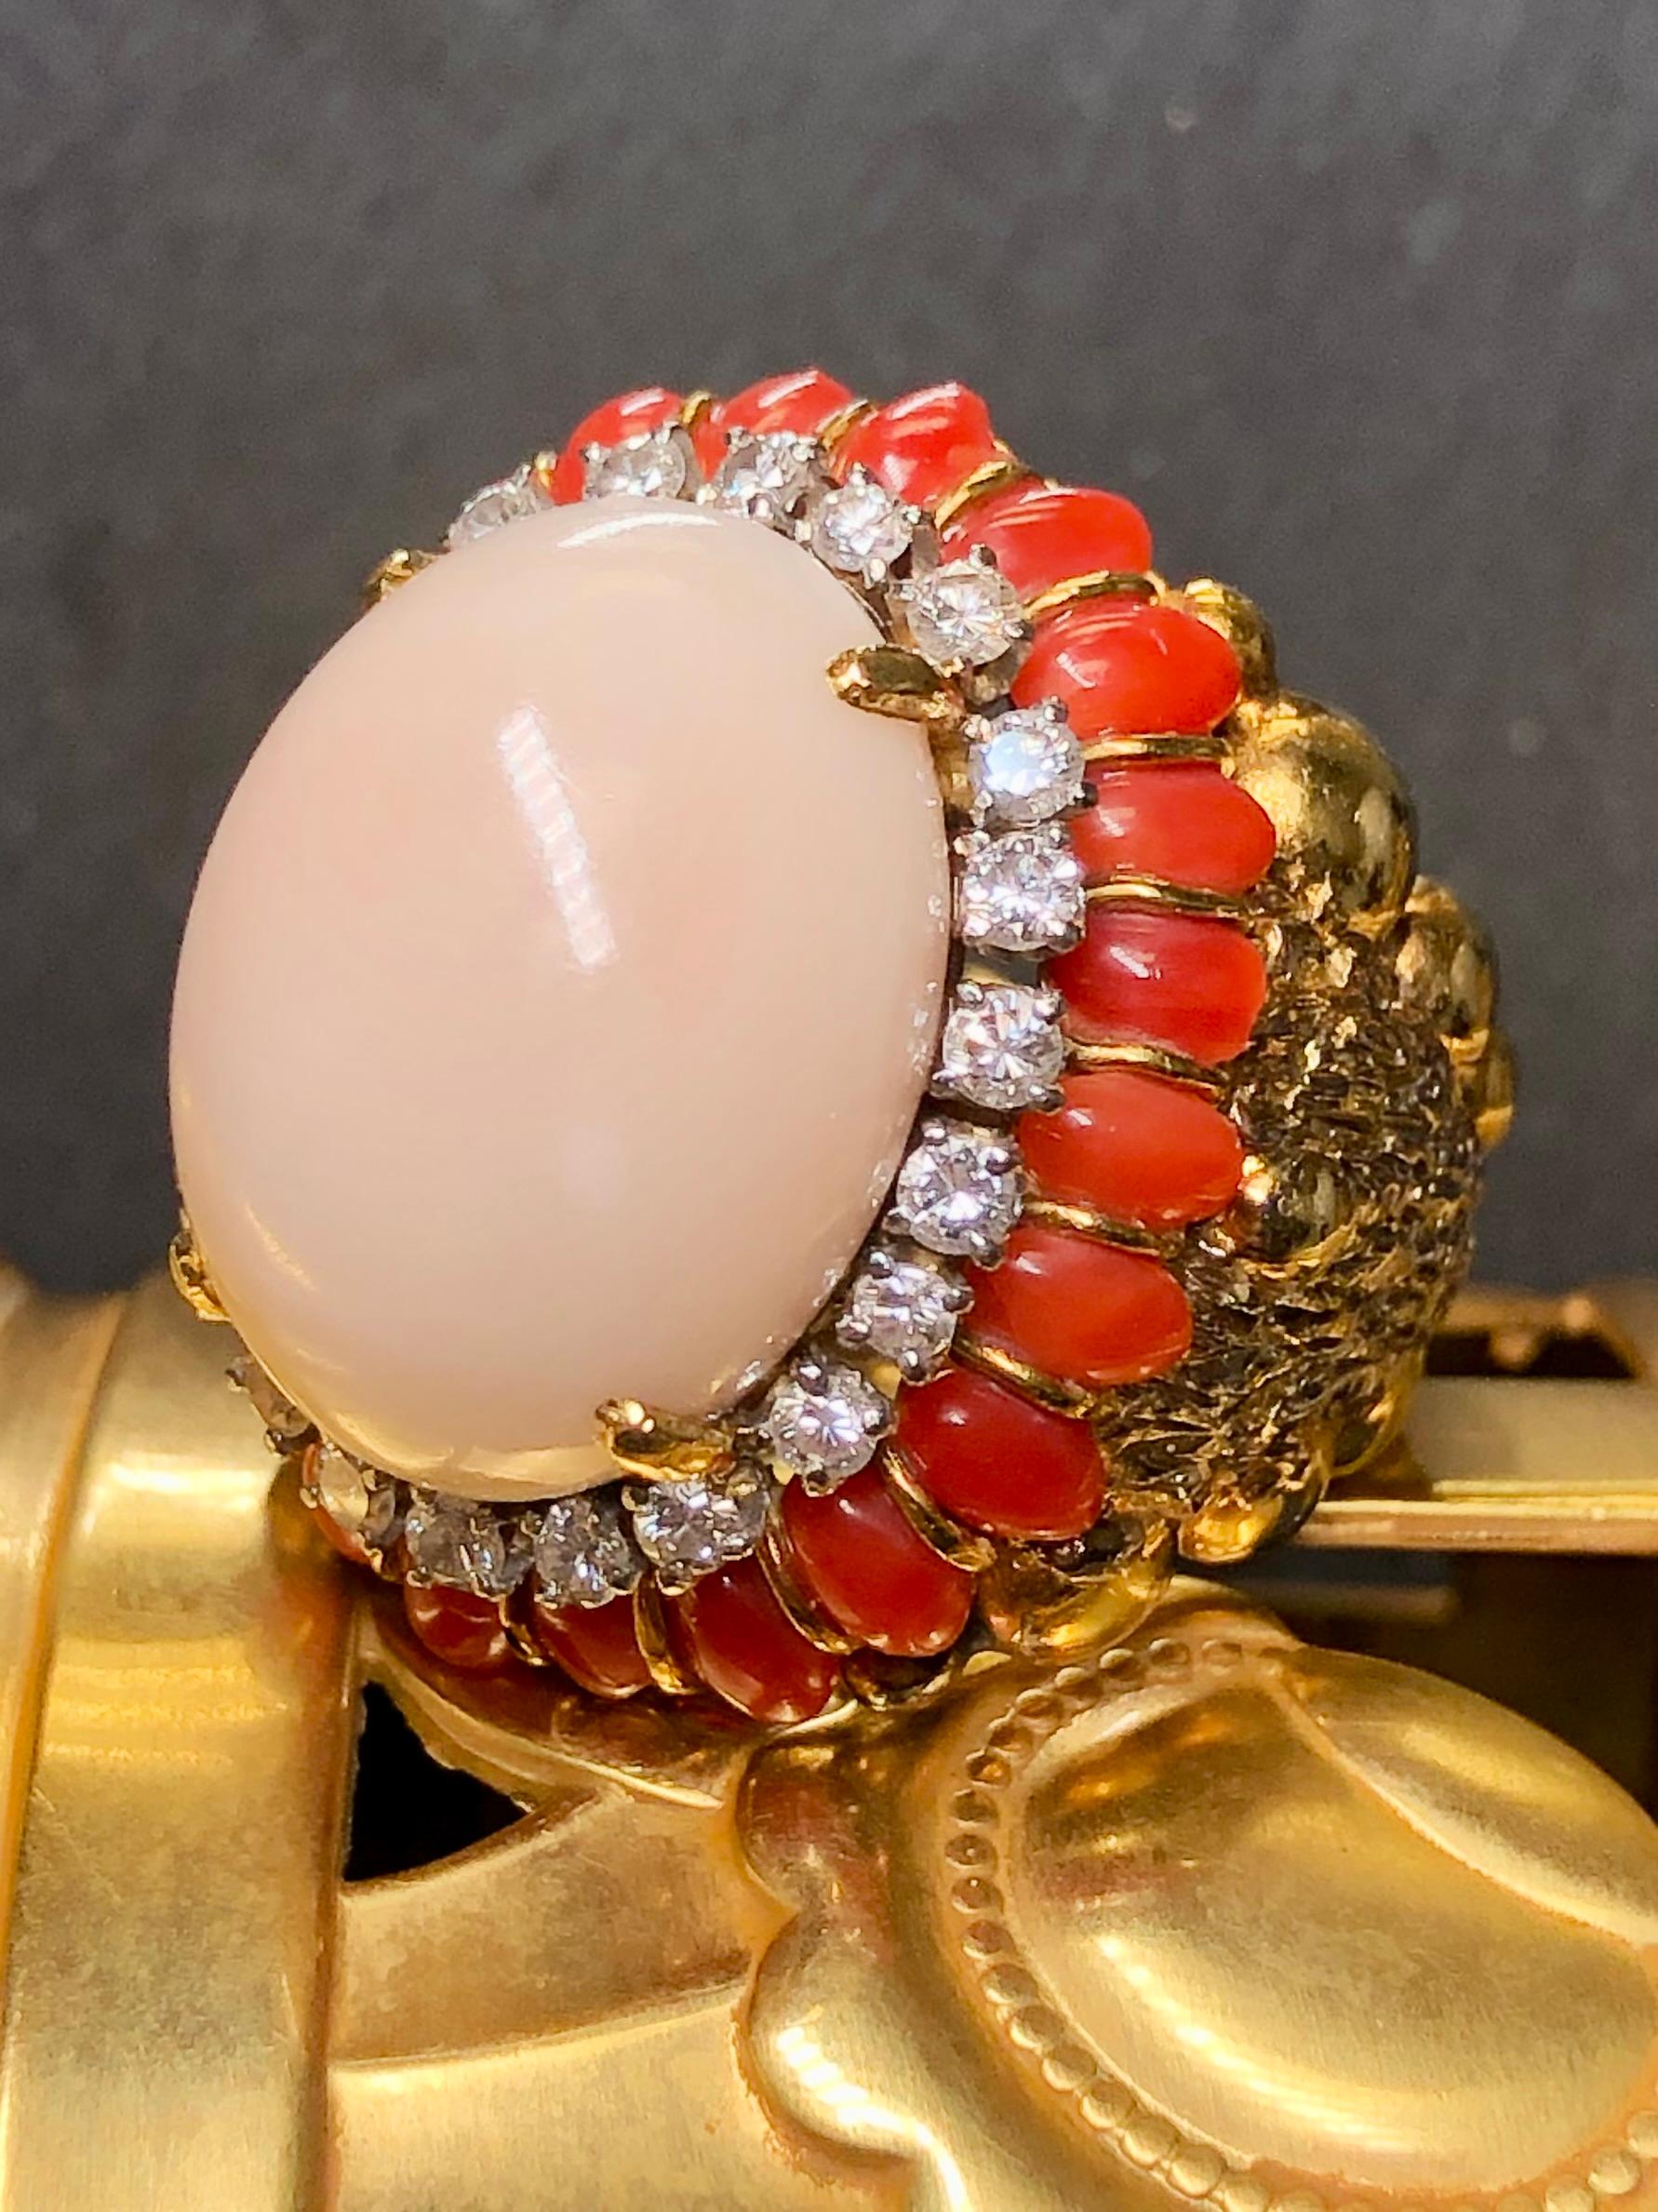 An impressive, large cocktail Ring c. the late 1960’s hand done in 18K yellow gold centered by an angel skin coral cabochon surrounded by smaller cabochons of deep red coral. Surrounding the center stone is approximately 1.10cttw in G-I color